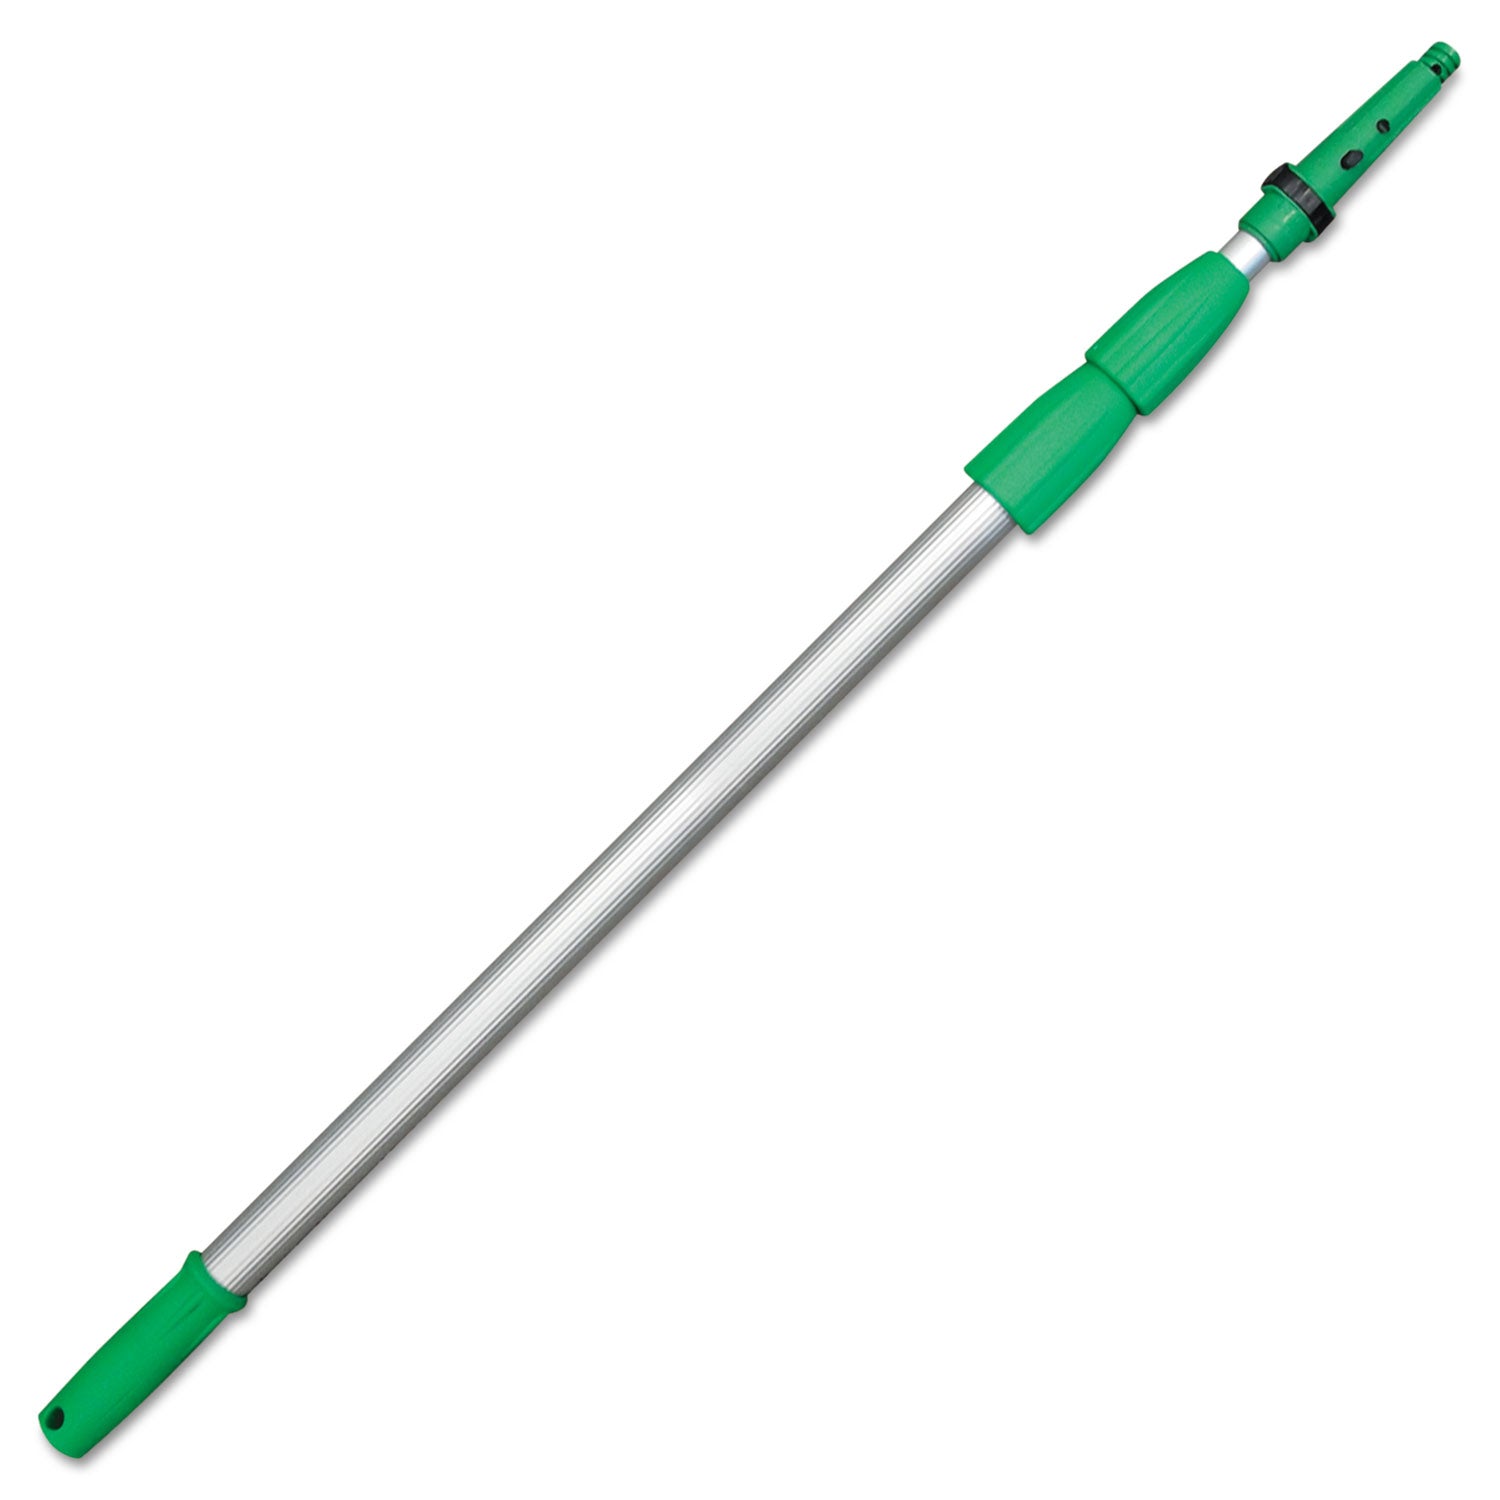 opti-loc-aluminum-extension-pole-14-ft-three-sections-green-silver_unged450 - 1